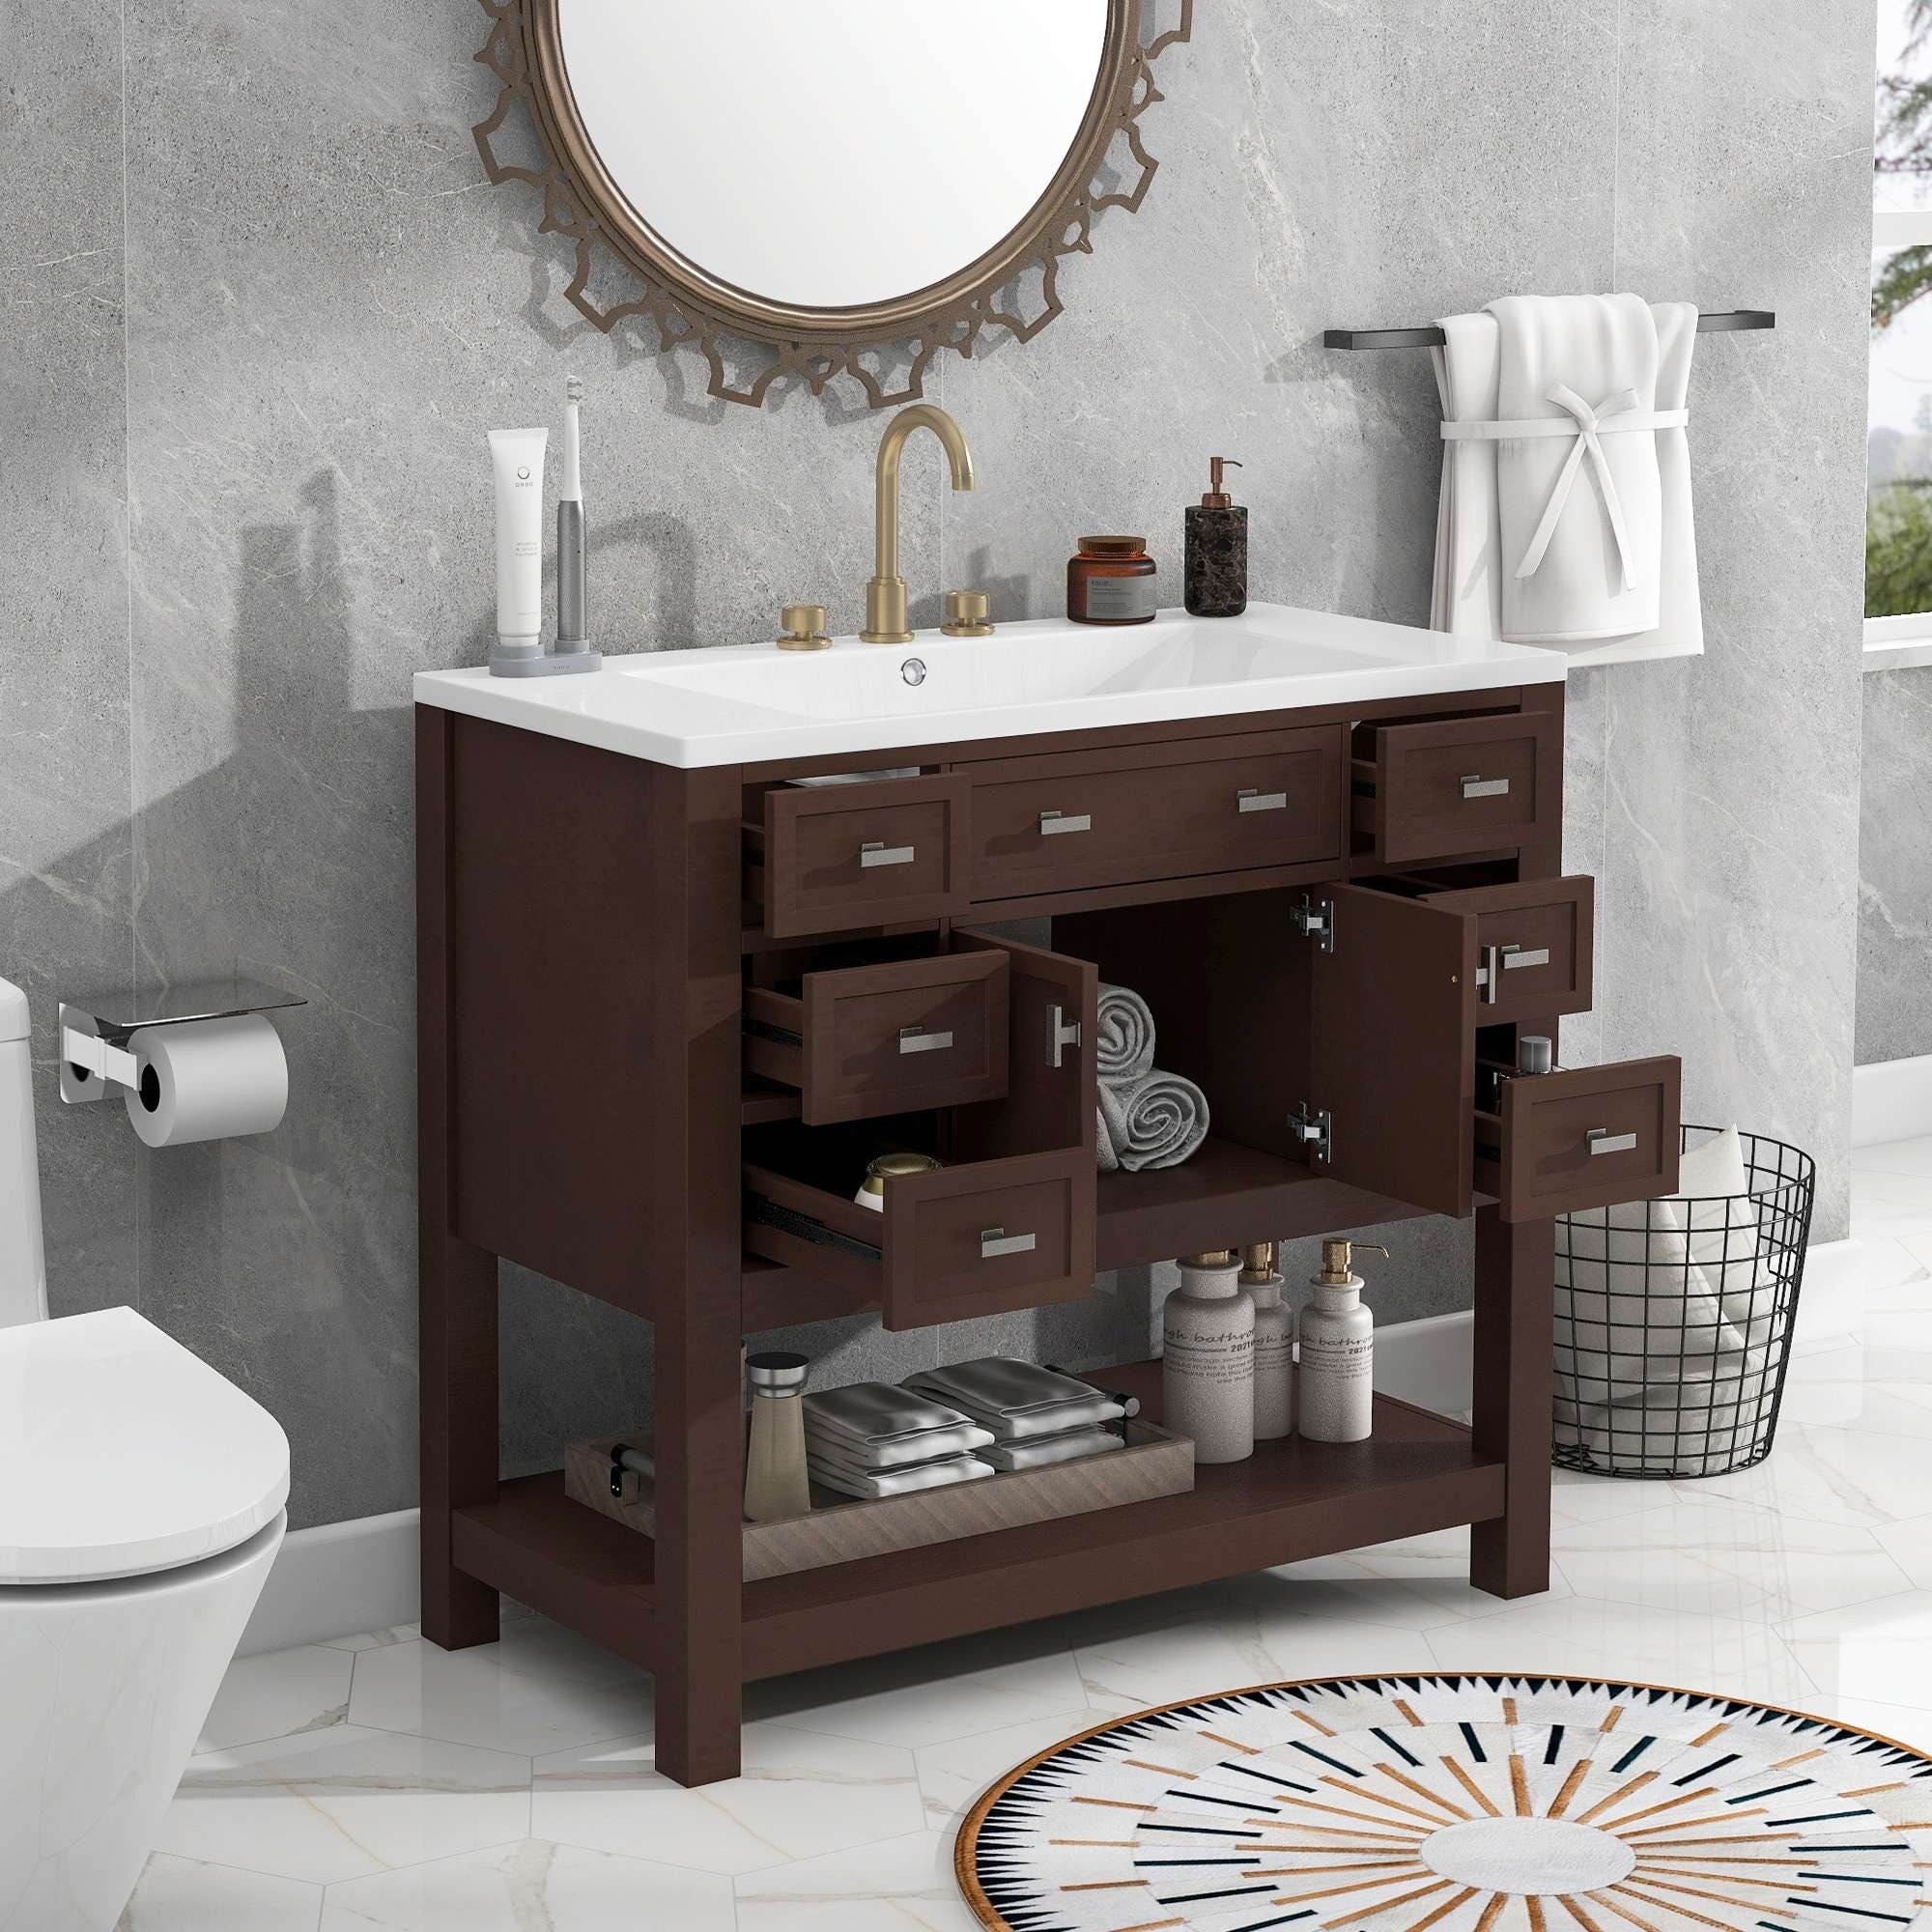 https://ak1.ostkcdn.com/images/products/is/images/direct/8689aa28a7d100481cac0b82f38440f5d52ab135/36%27%27-Bathroom-Vanity-with-Top-Sink.jpg